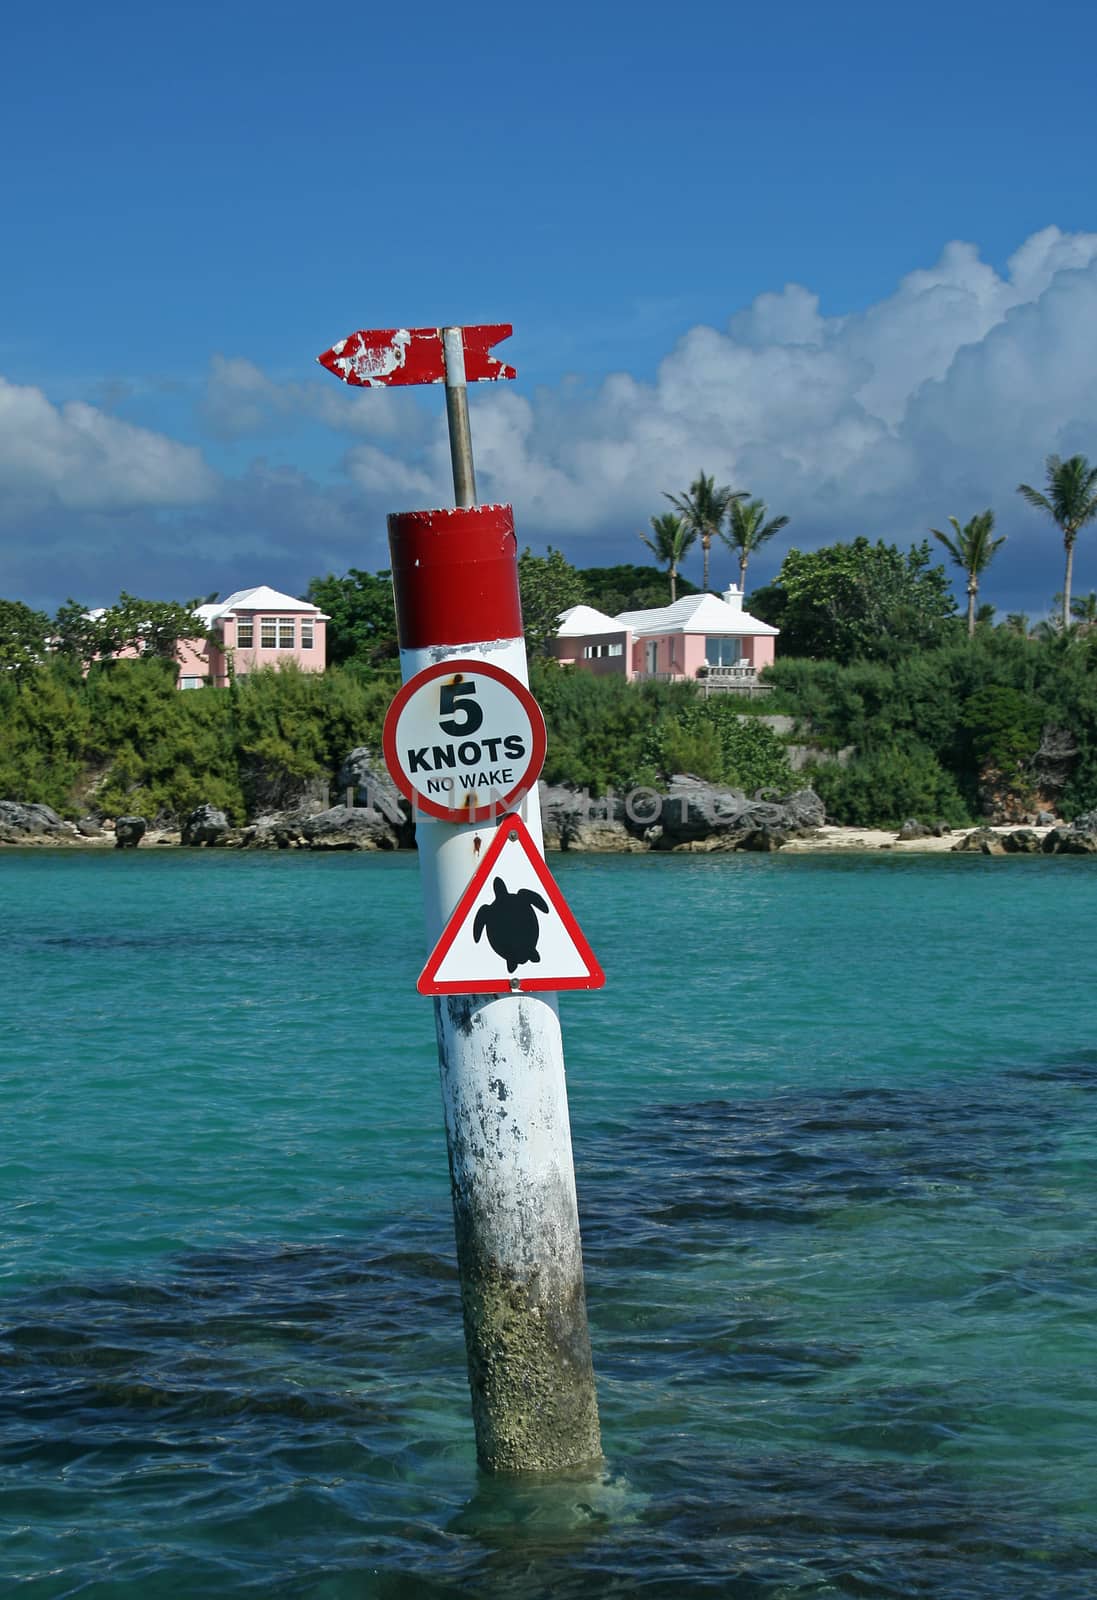 A signpost in a tropical sea, cautioning slow speeds due to Turtles in the area